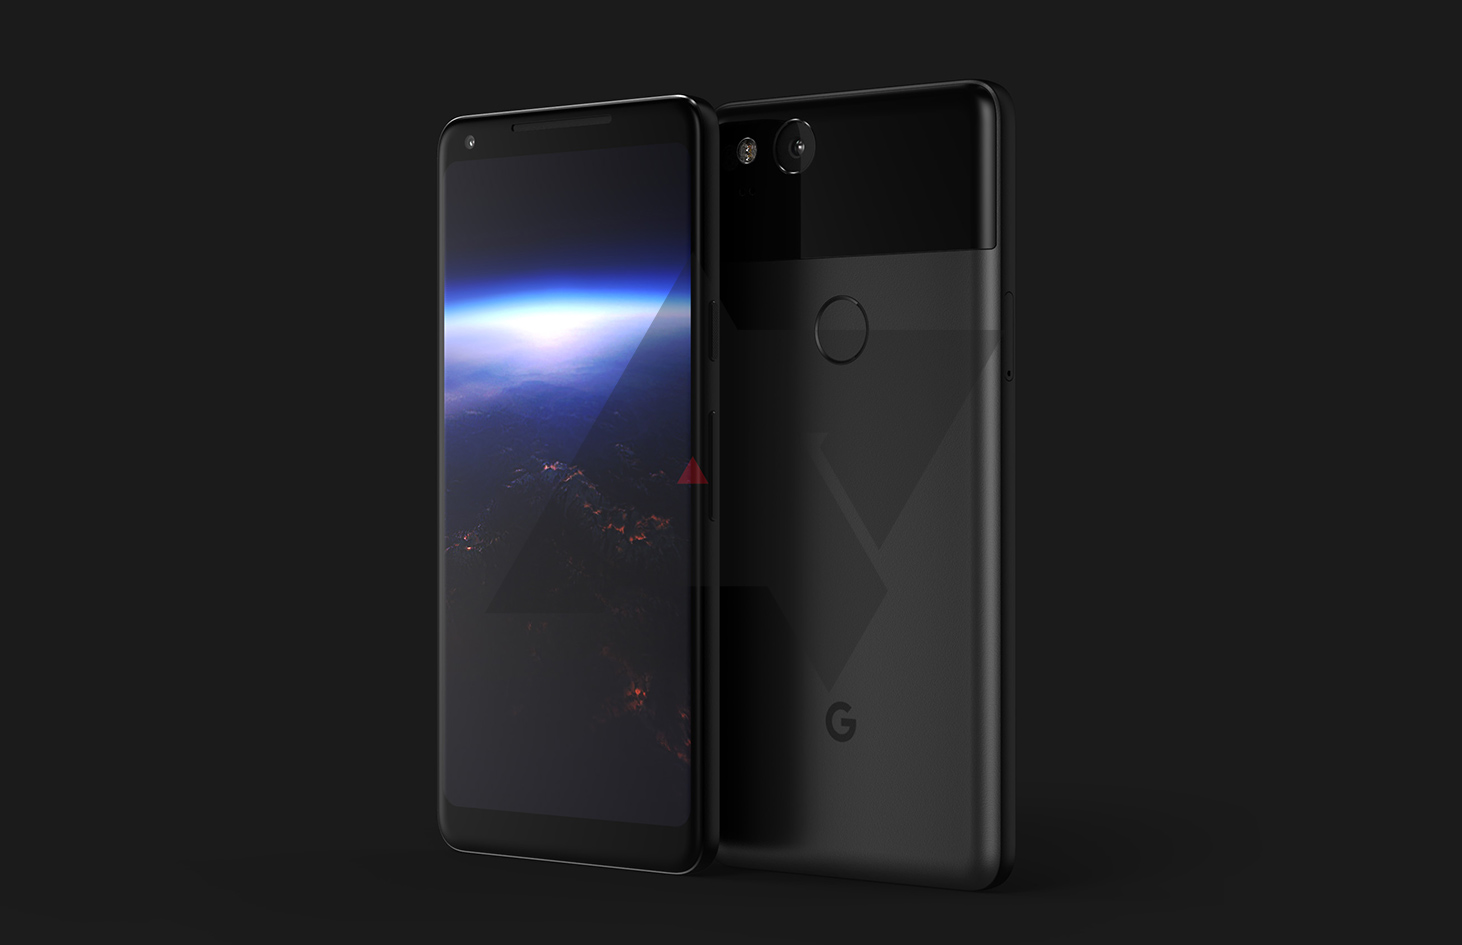 The First Image Of The Smartphone Google Pixel 2 XL Is Leaked